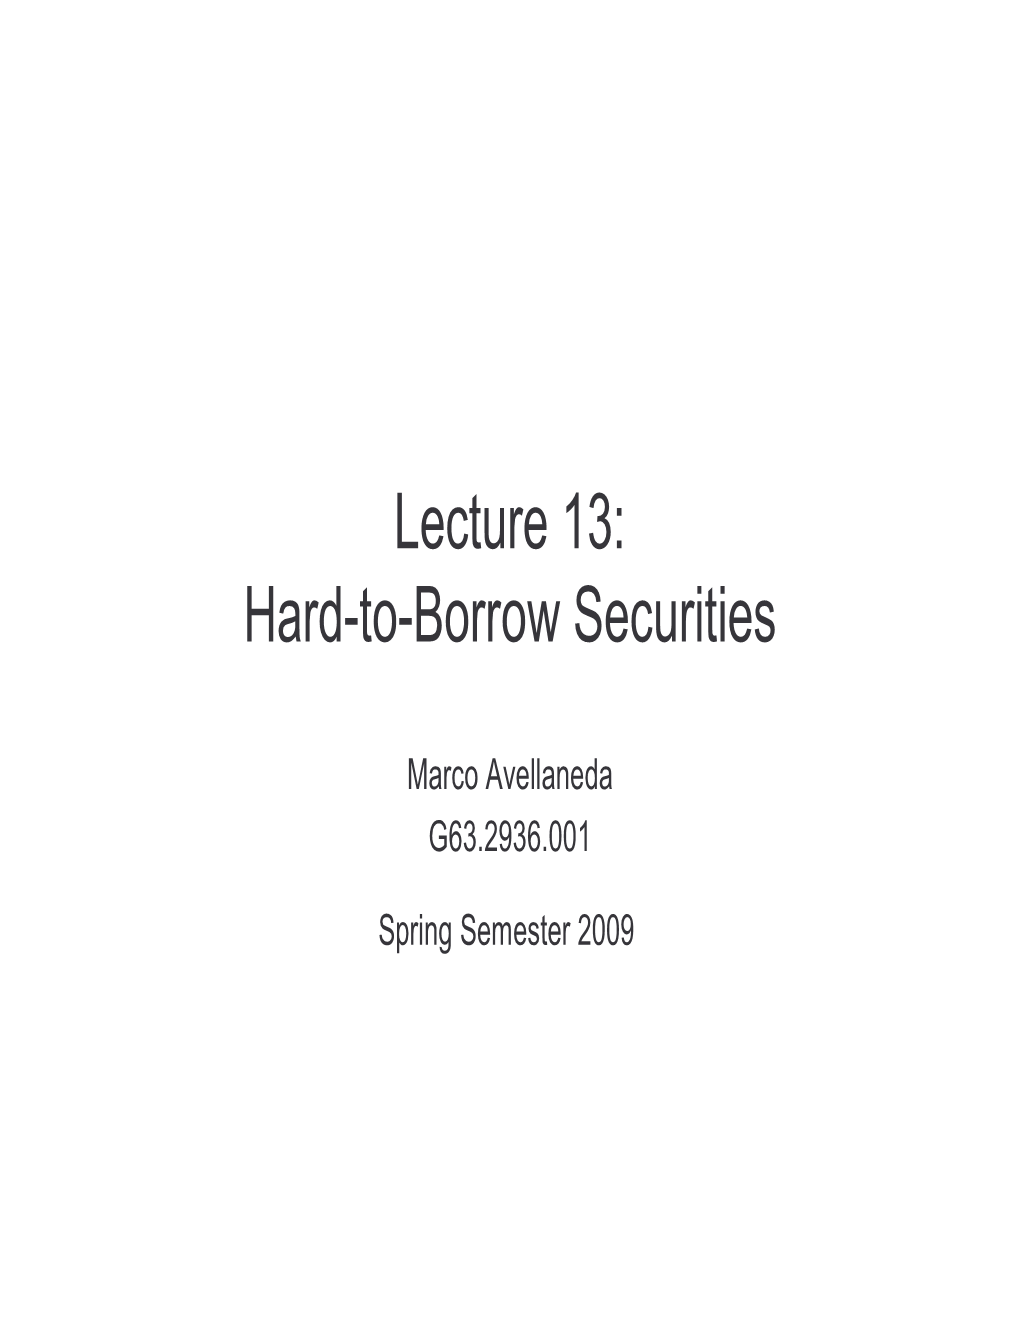 Lecture 13: Hard-To-Borrow Securities